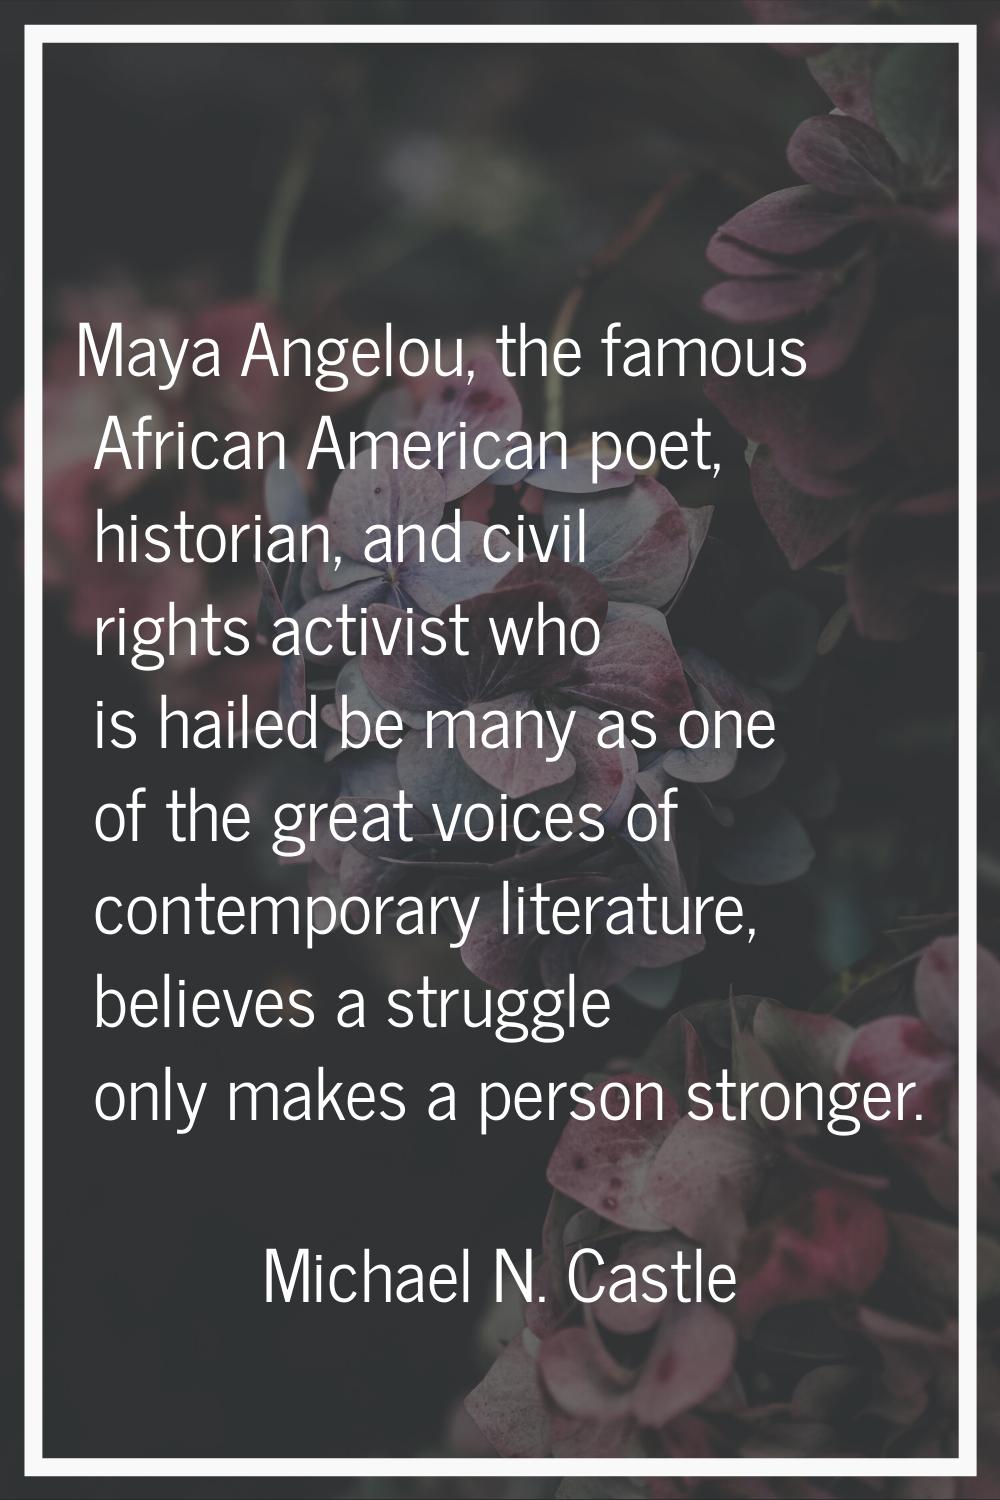 Maya Angelou, the famous African American poet, historian, and civil rights activist who is hailed 